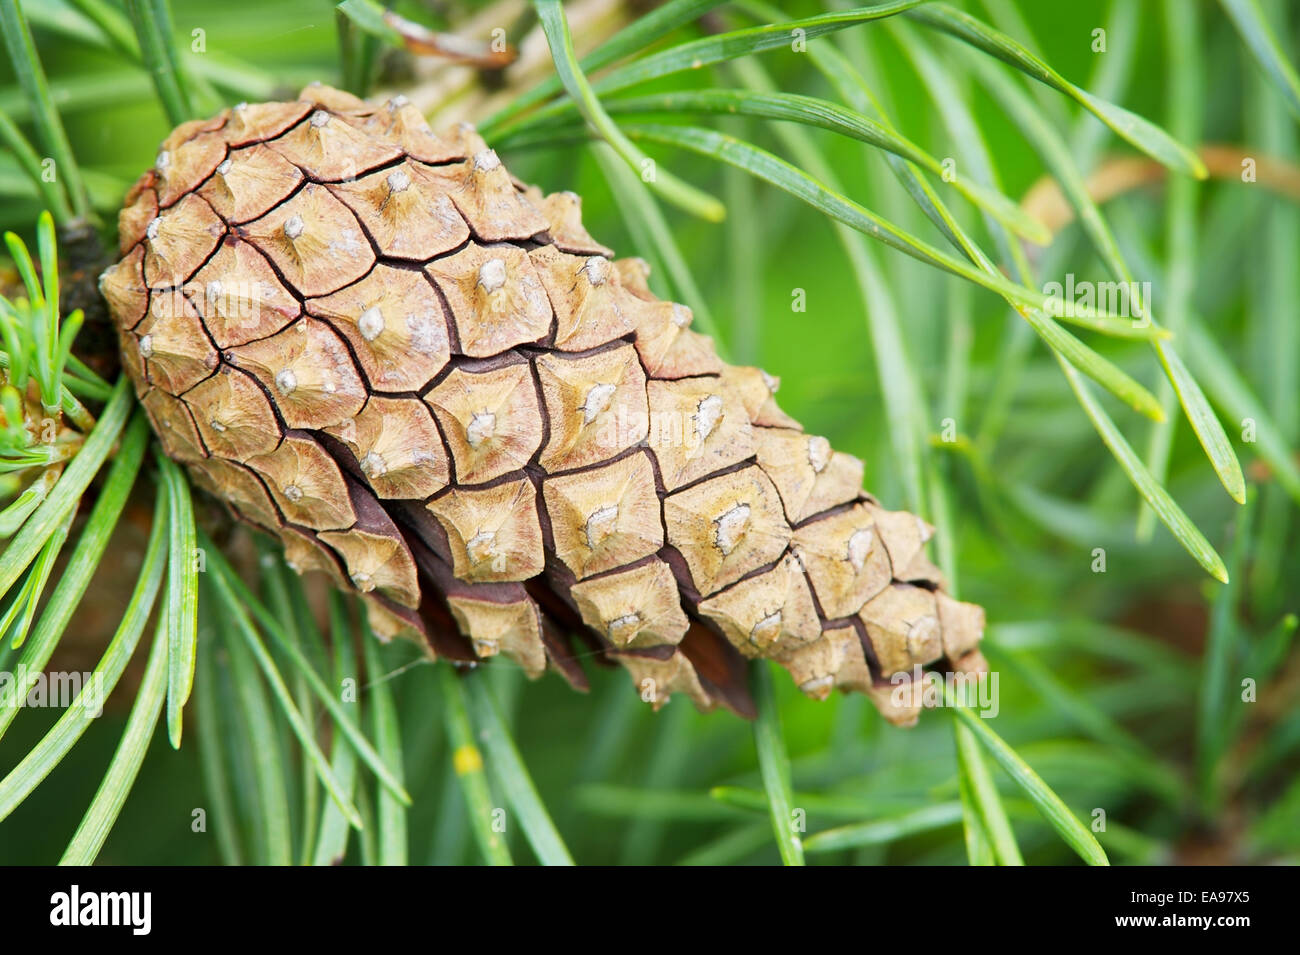 Scots or scotch pine Pinus sylvestris cone on tree growing in evergreen coniferous forest. Pomerania, Poland. Stock Photo